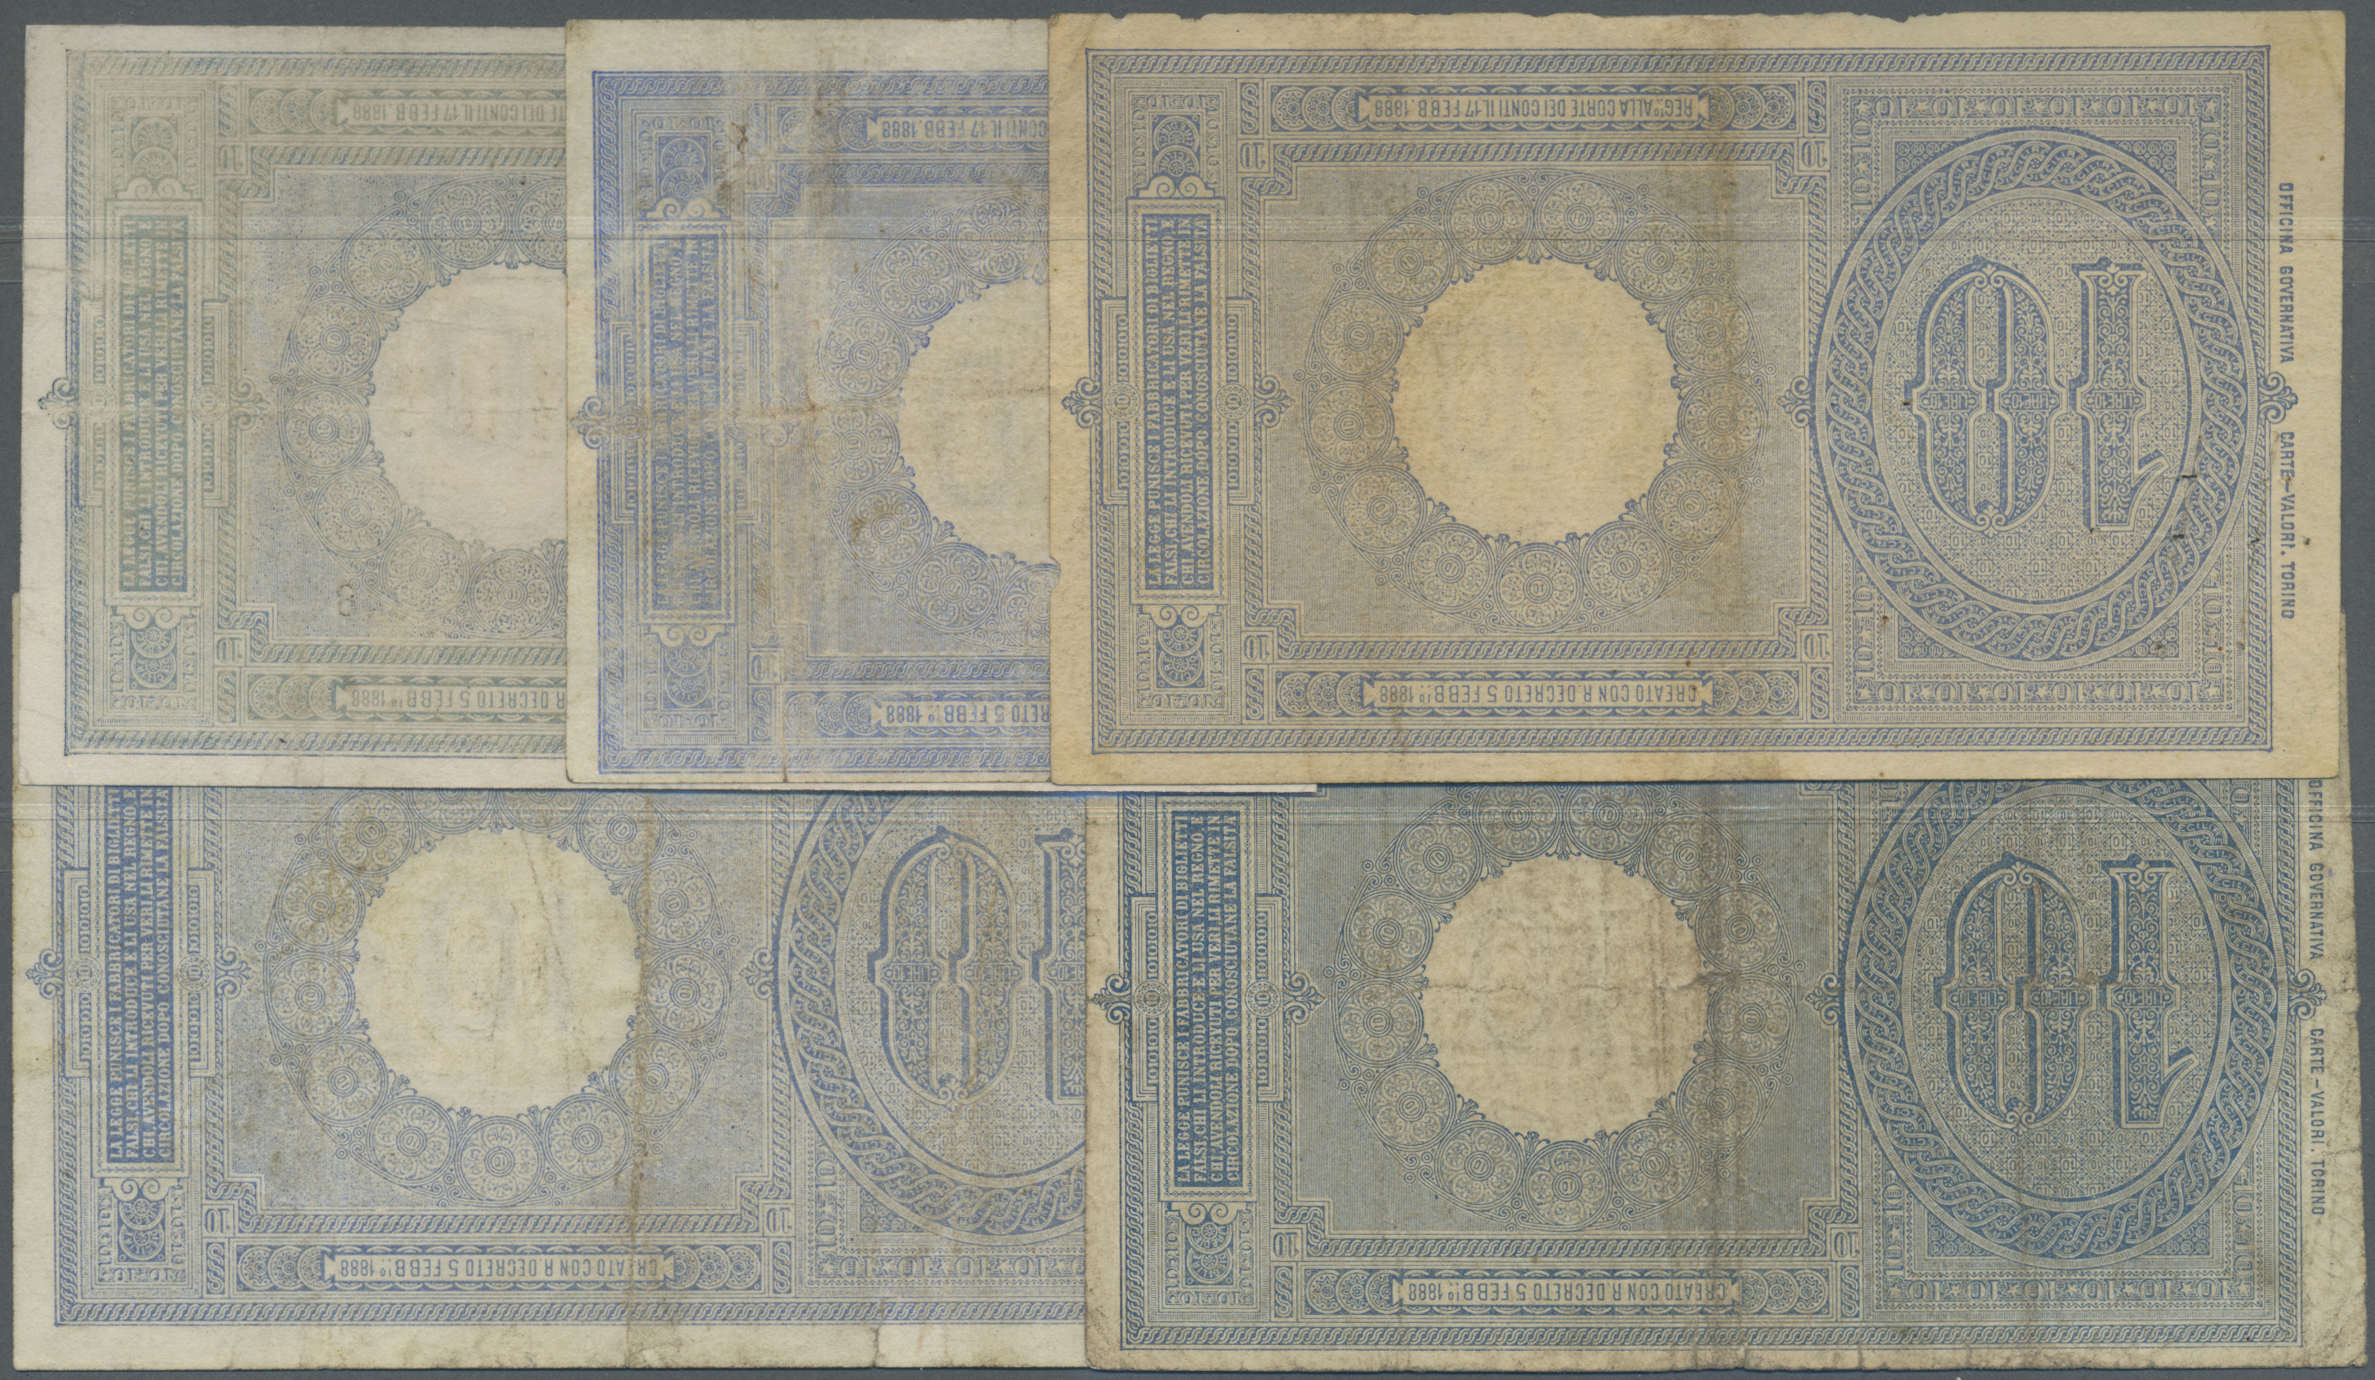 Lot 00452 - Italy / Italien | Banknoten  -  Auktionshaus Christoph Gärtner GmbH & Co. KG Sale #48 The Banknotes